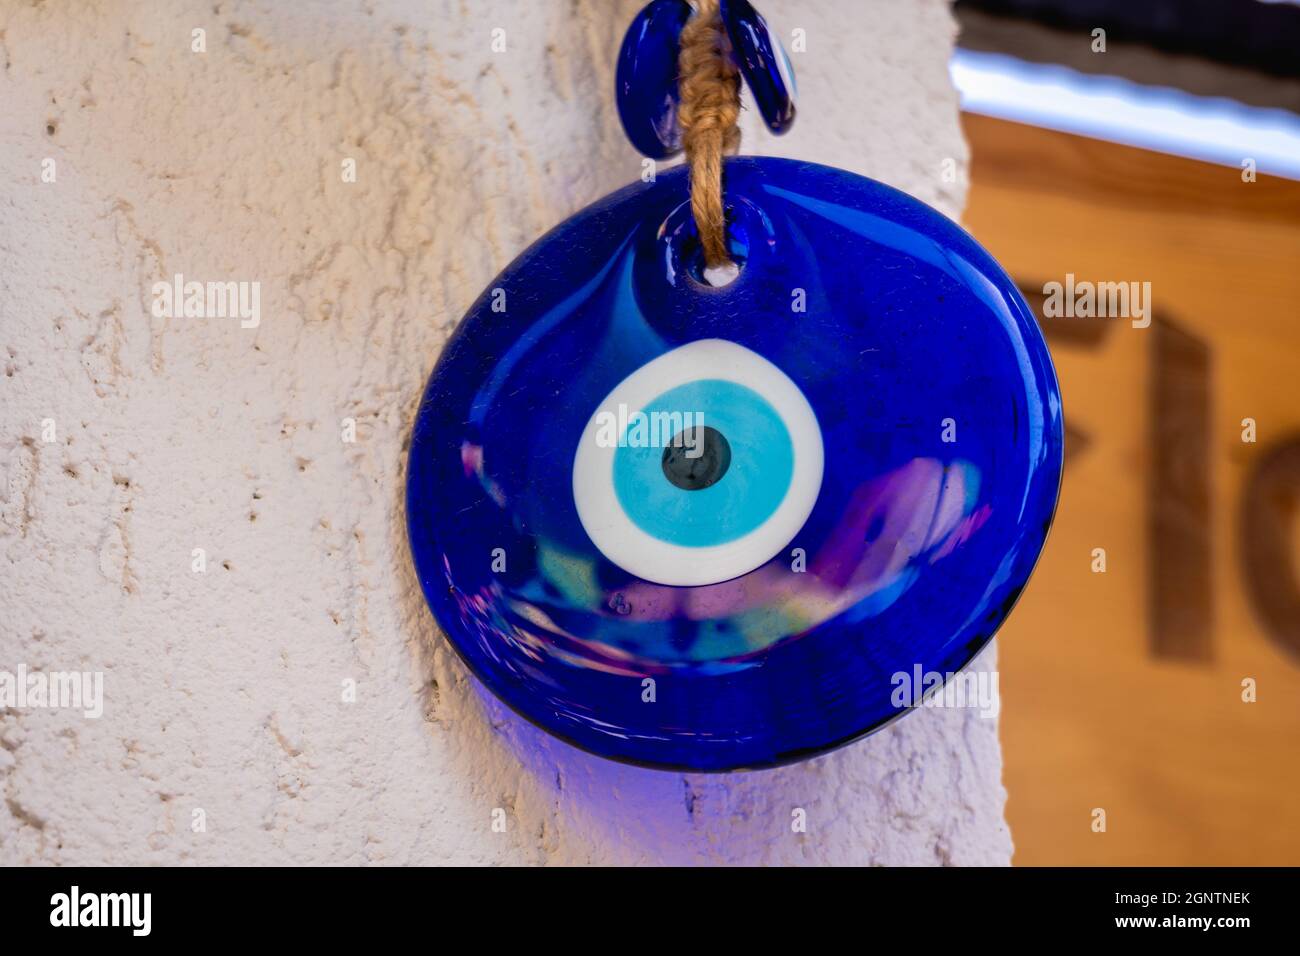 The Blue Turkish Evil Eye (Nazar Amulet): Meaning and Should I